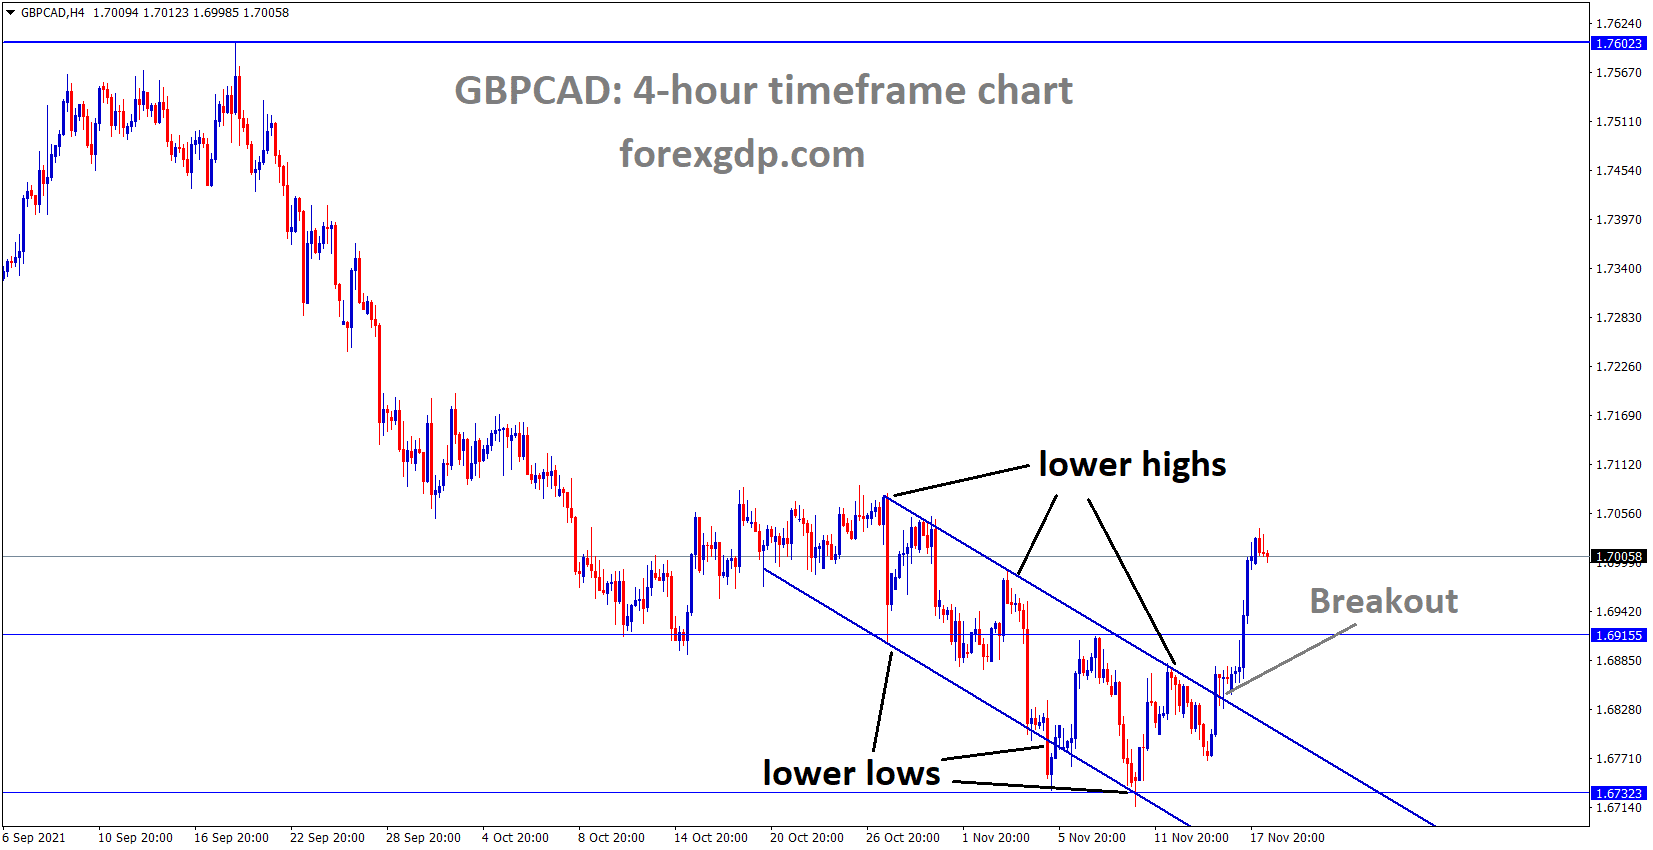 GBPCAD has broken the Descending channel and stands above the previous resistance area of the channel